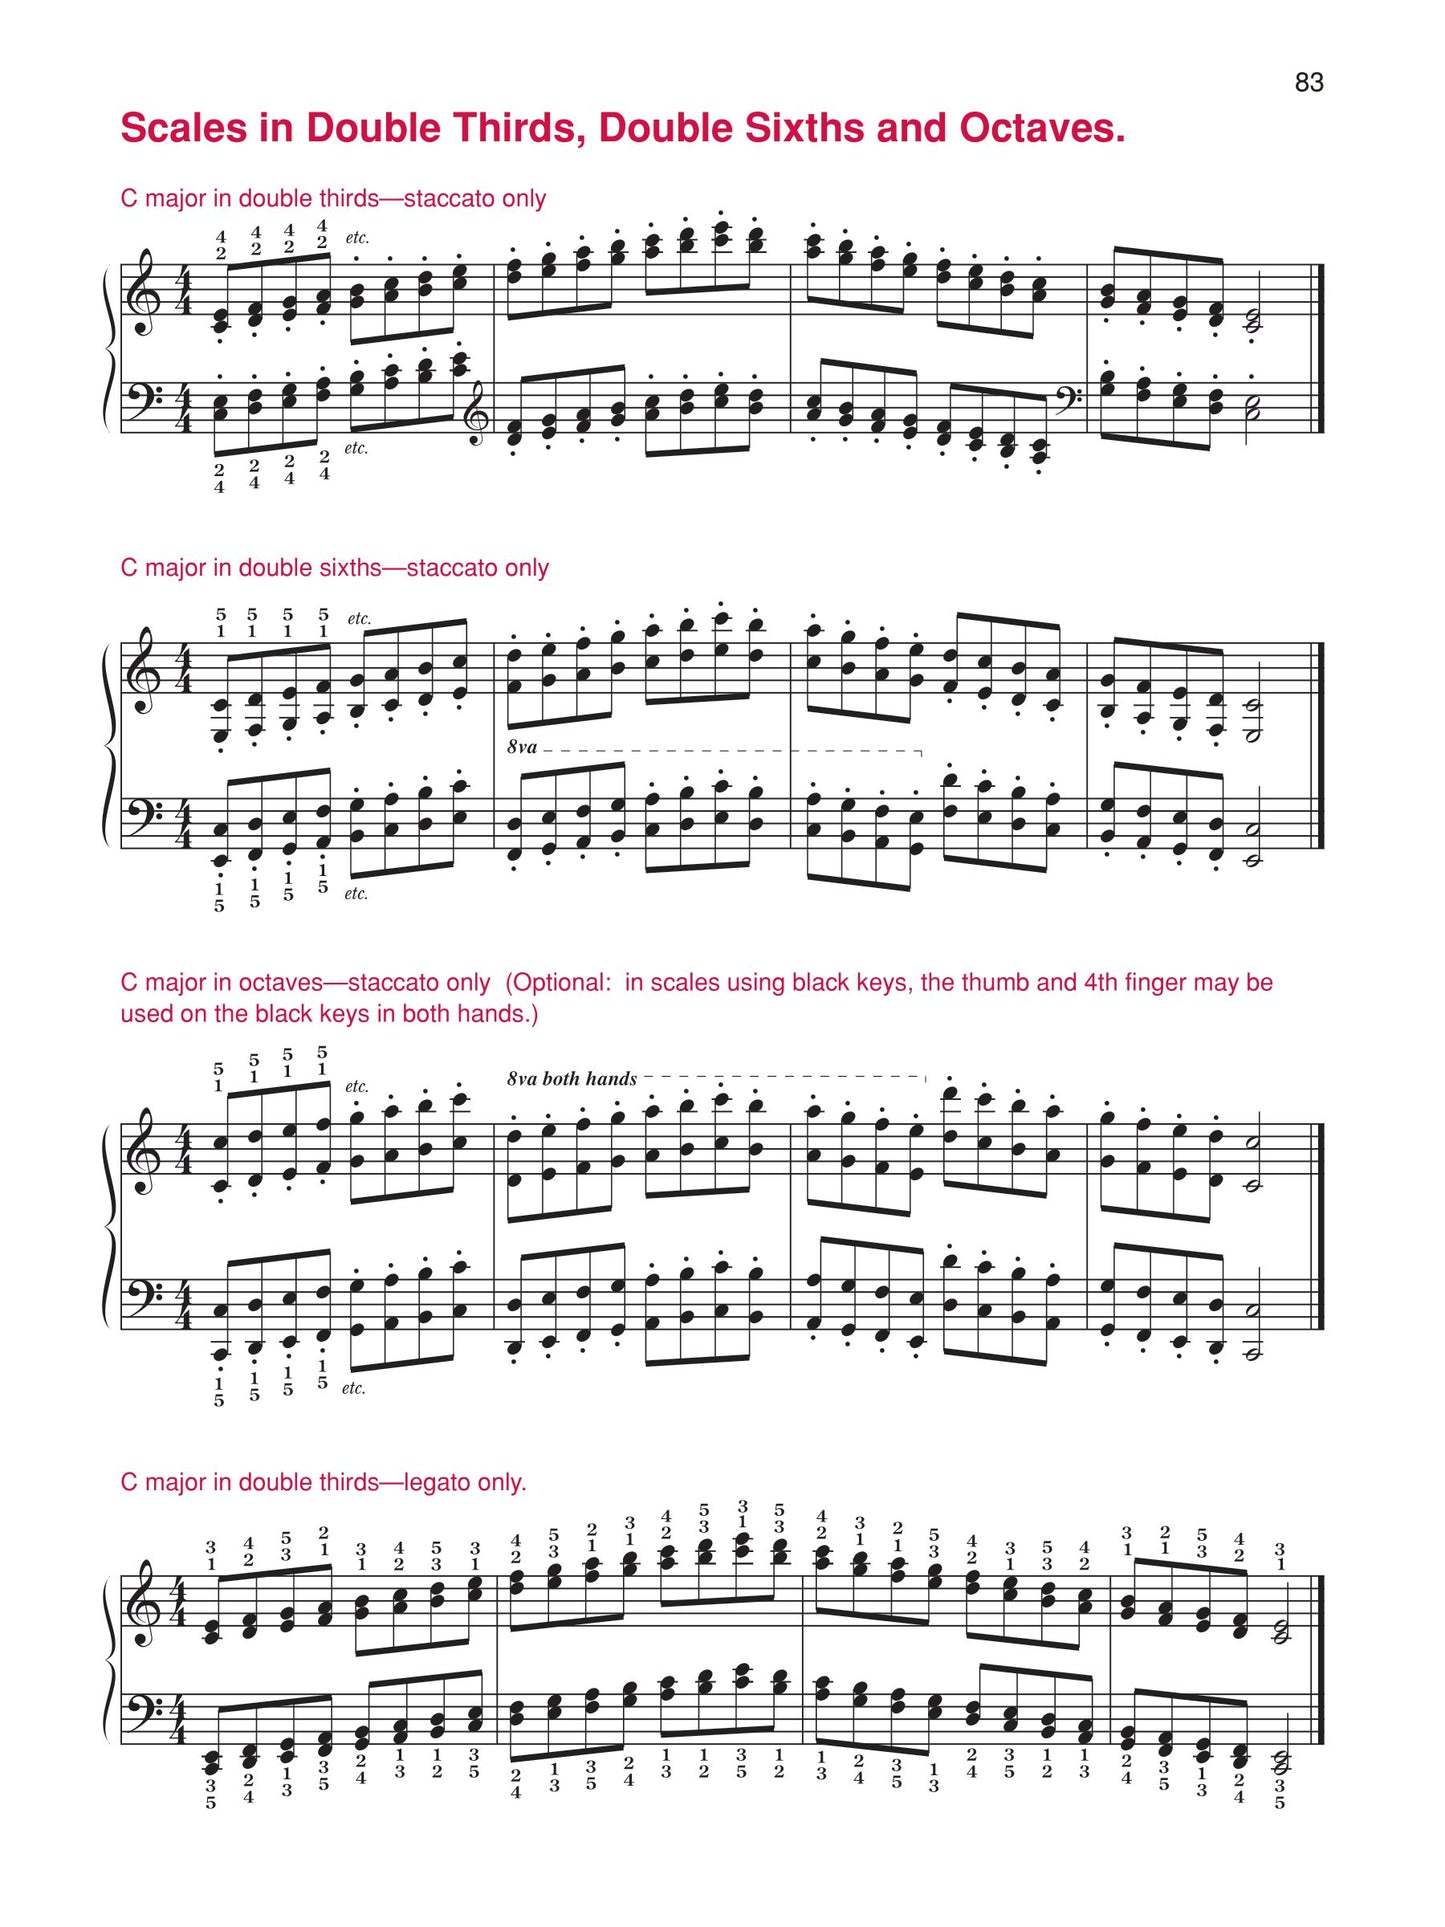 Alfred's Basic Piano Library - The Complete Book of Scales, Chords, Arpeggios & Cadences